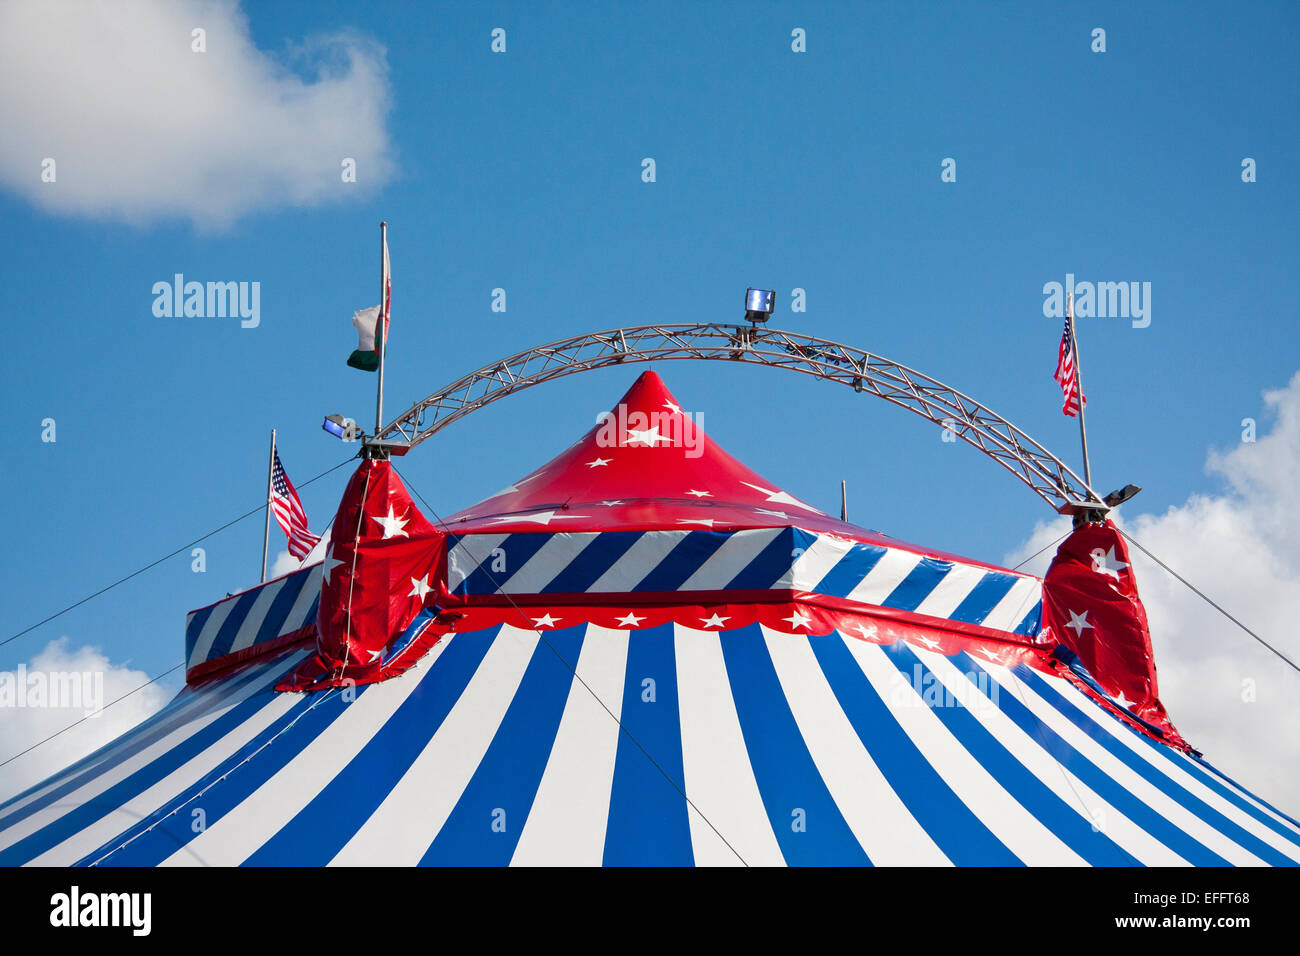 Uncle Sam's Great American Circus big top against a blue sky. Stock Photo